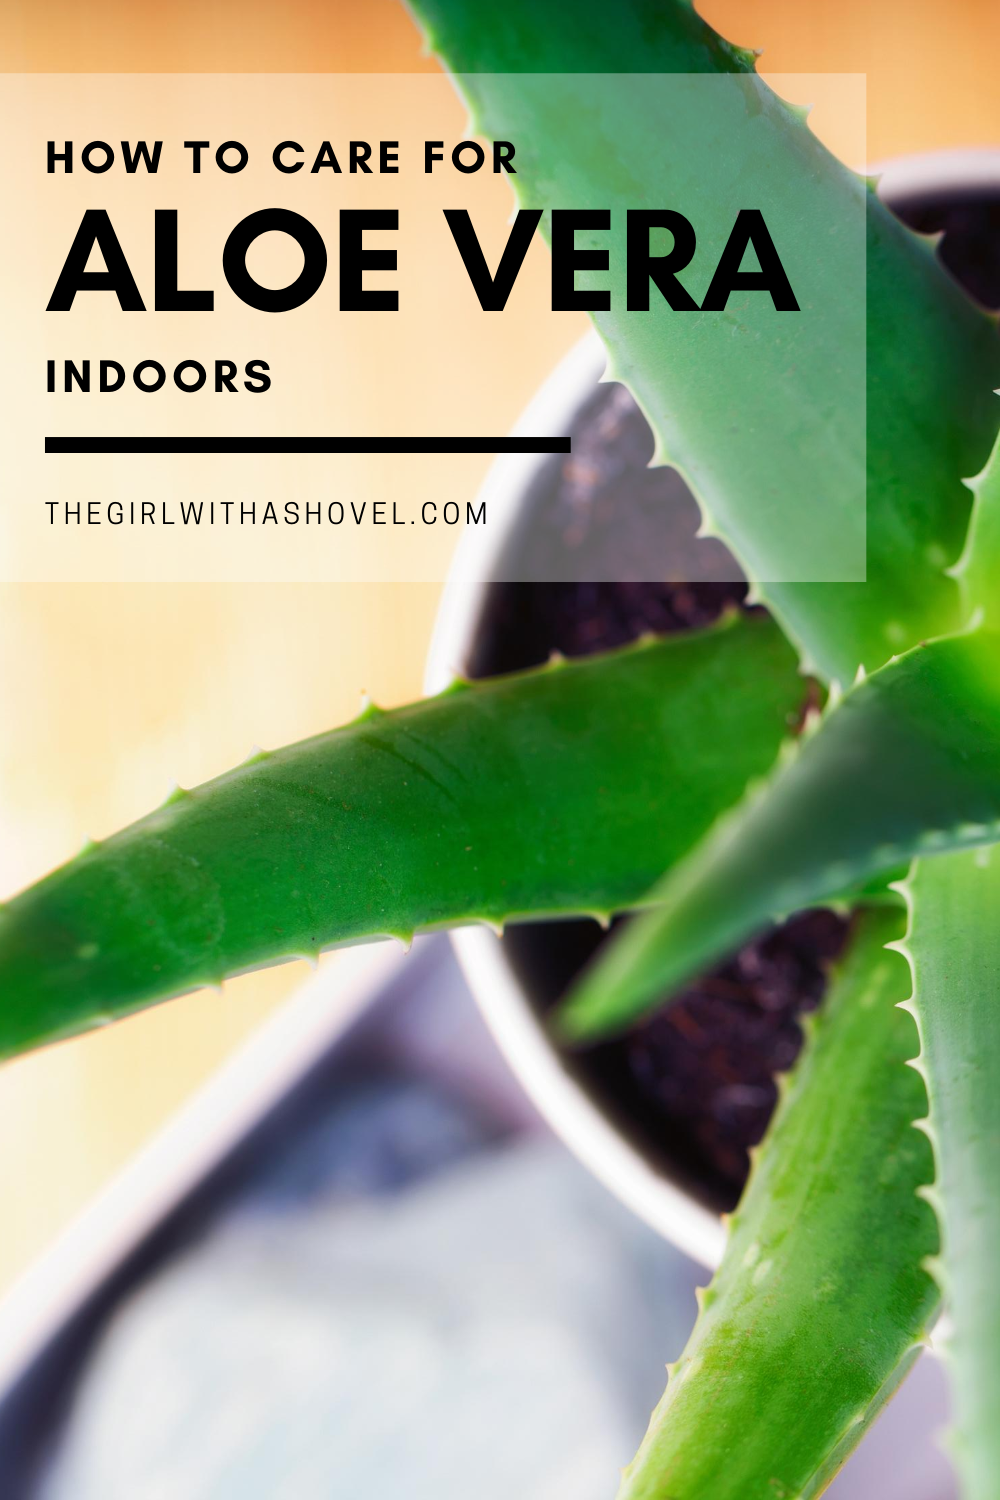 The 3 Keys to Aloe Plant Care - The Girl with a Shovel